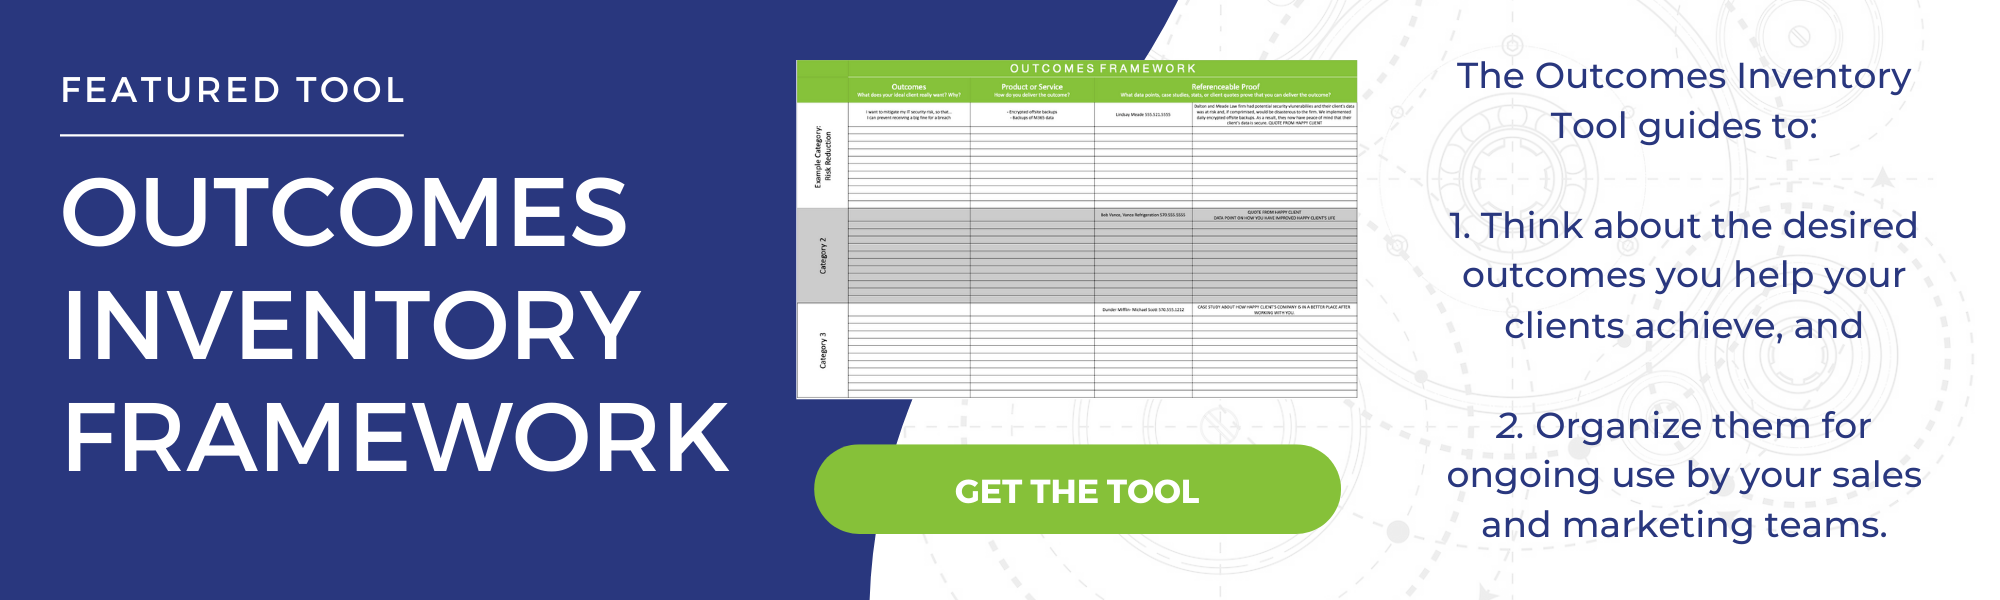 Use our outcomes framework to organize and store details about the outcomes you help your clients achieve